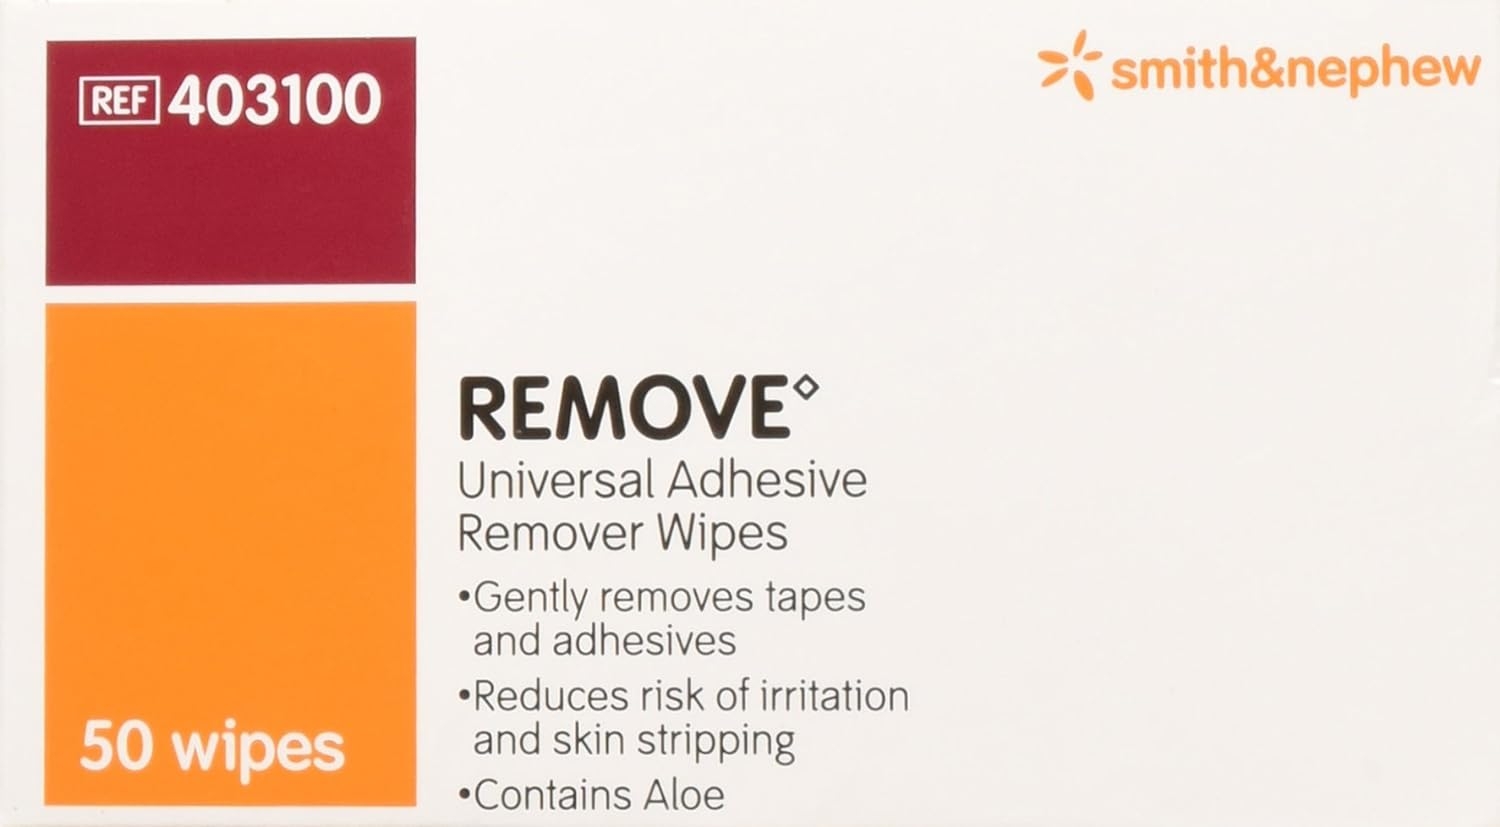 Remove Adhesive Remover Wipes 403100, 50-Count (1-Pack)